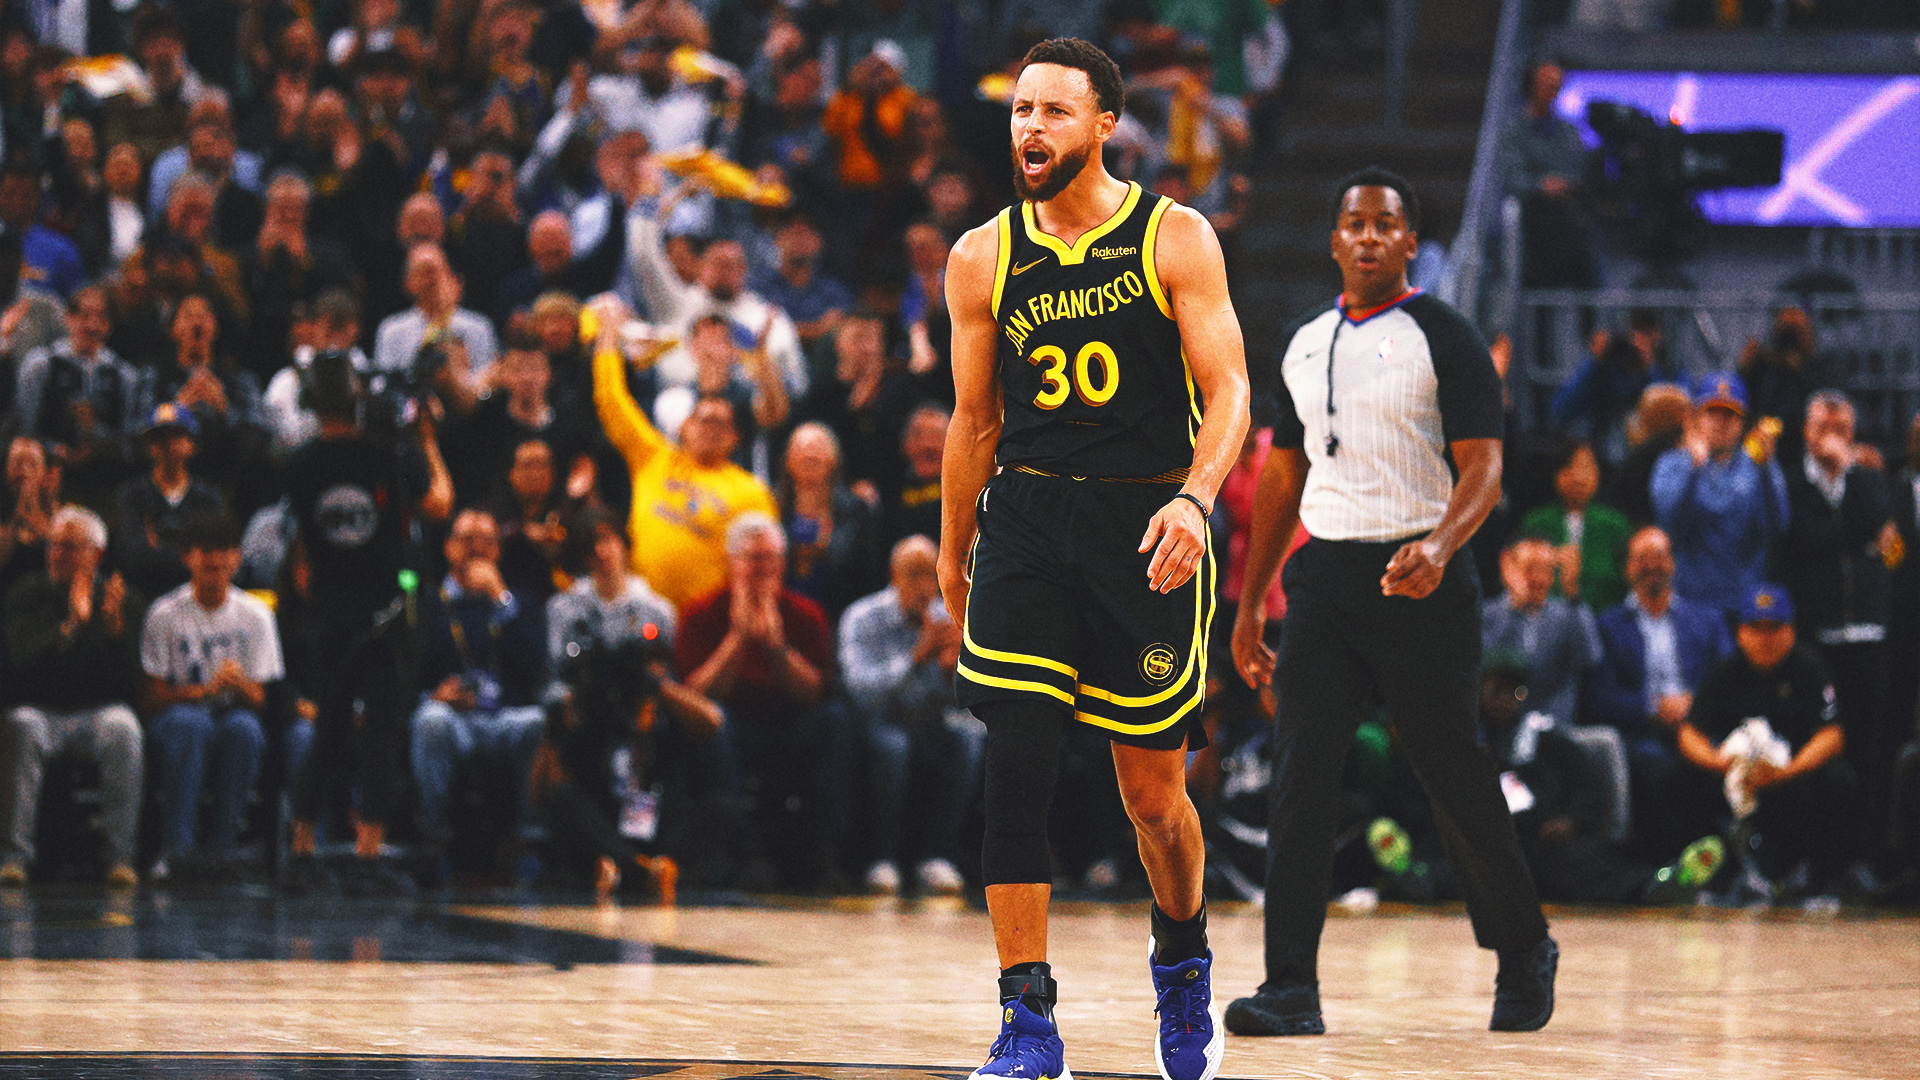 Steph Curry outduels former teammate Jordan Poole to help Warriors beat Wizards, 129-118